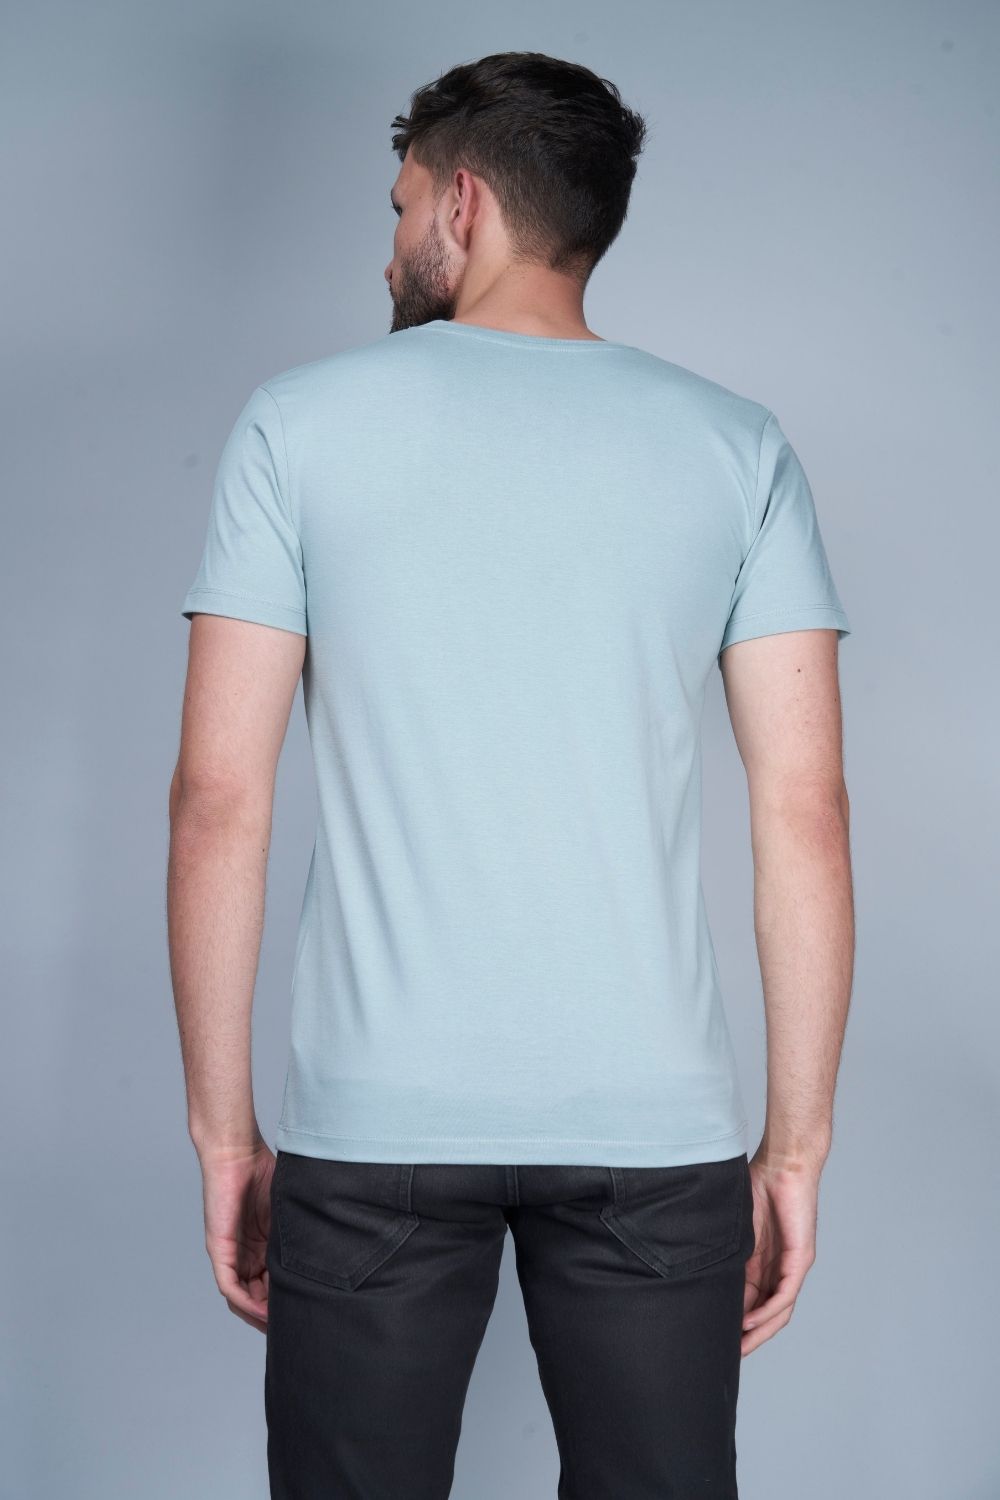 Shanghai blue colored, Solid T shirt for men, with half sleeves and round neck, back view.